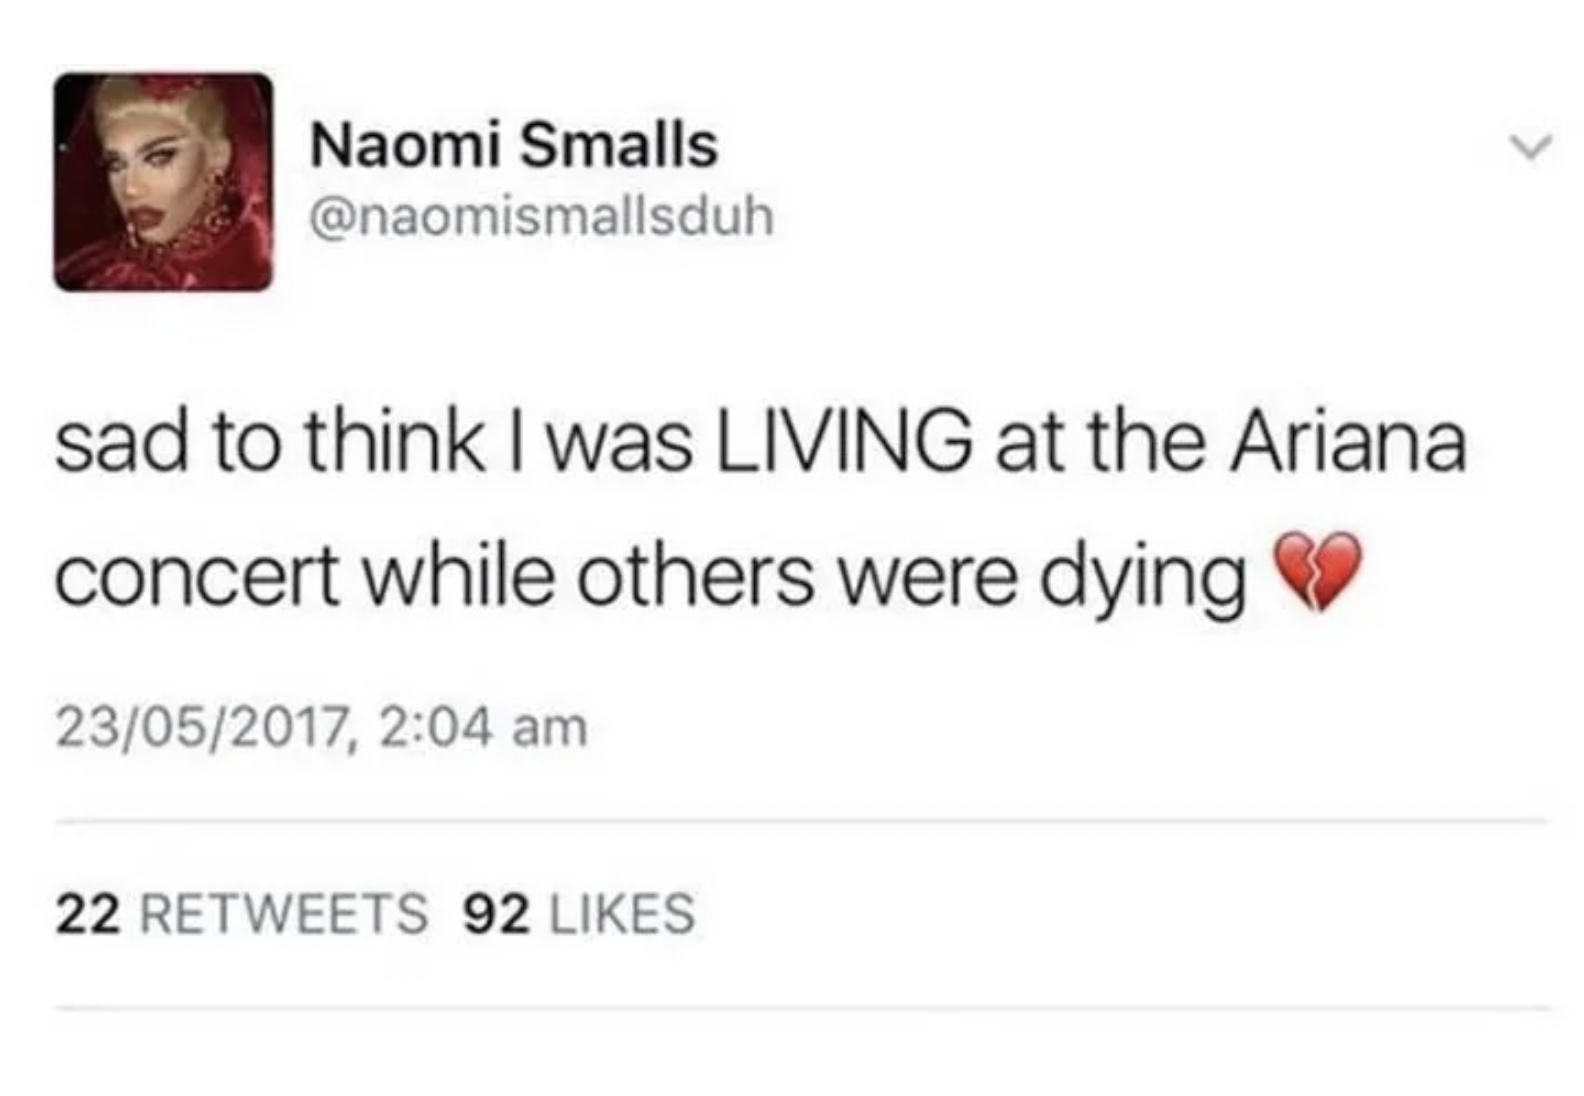 naomi smalls ariana grande - Naomi Smalls sad to think I was Living at the Ariana concert while others were dying 23052017, 22 92